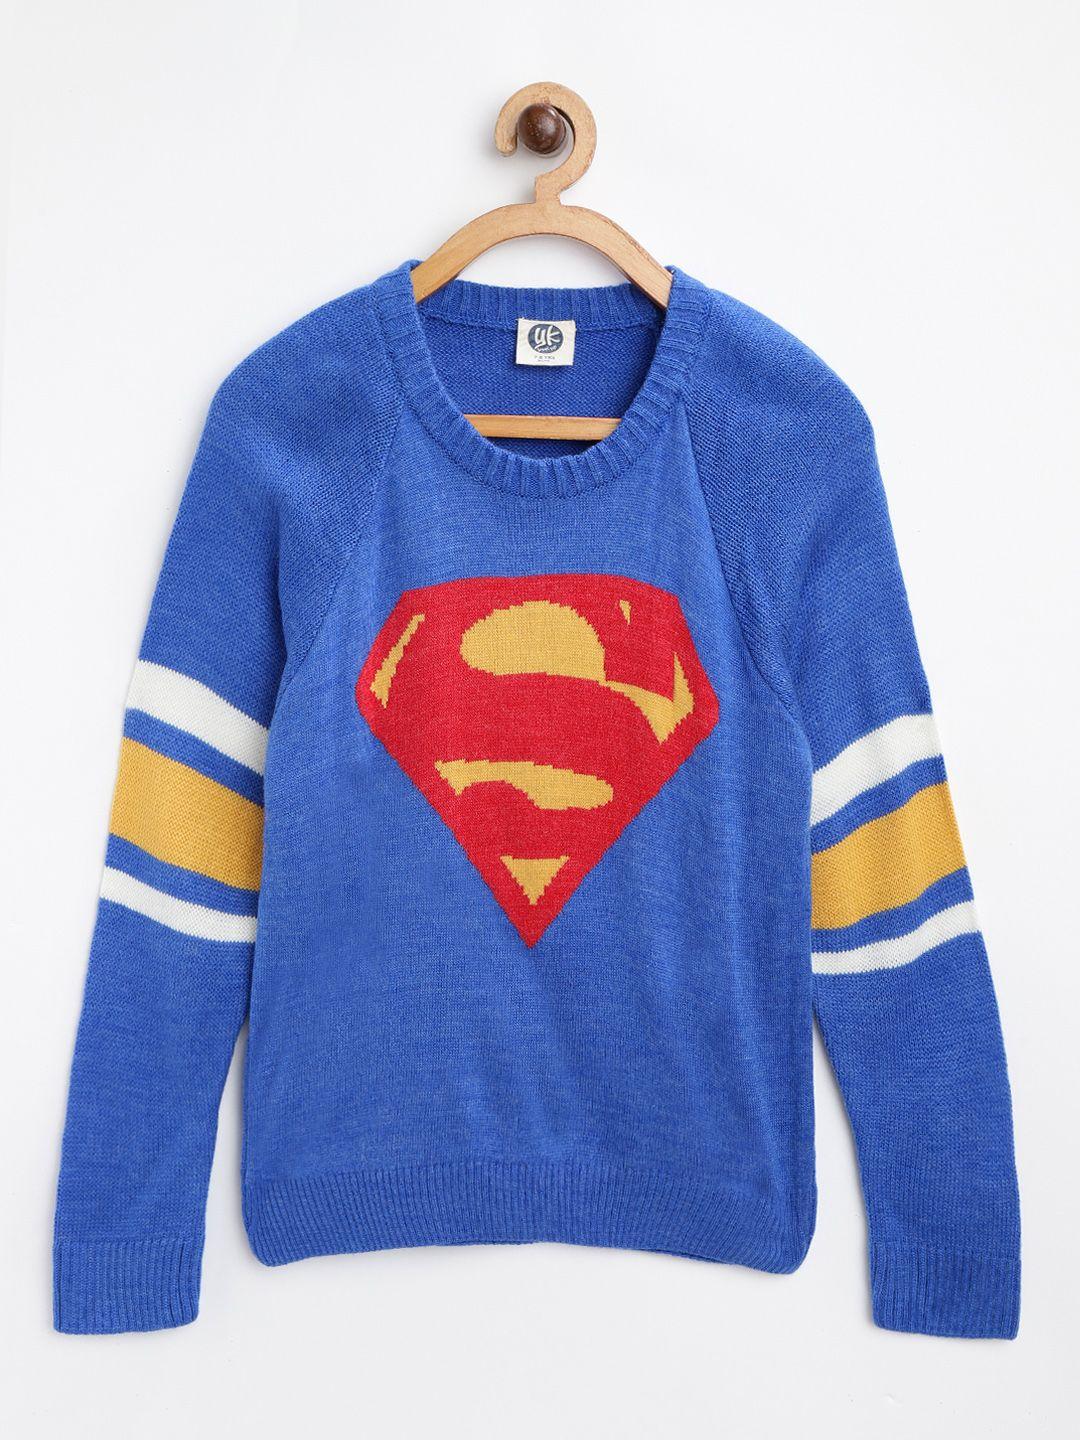 yk justice league boys blue & red superman patterned acrylic sweater